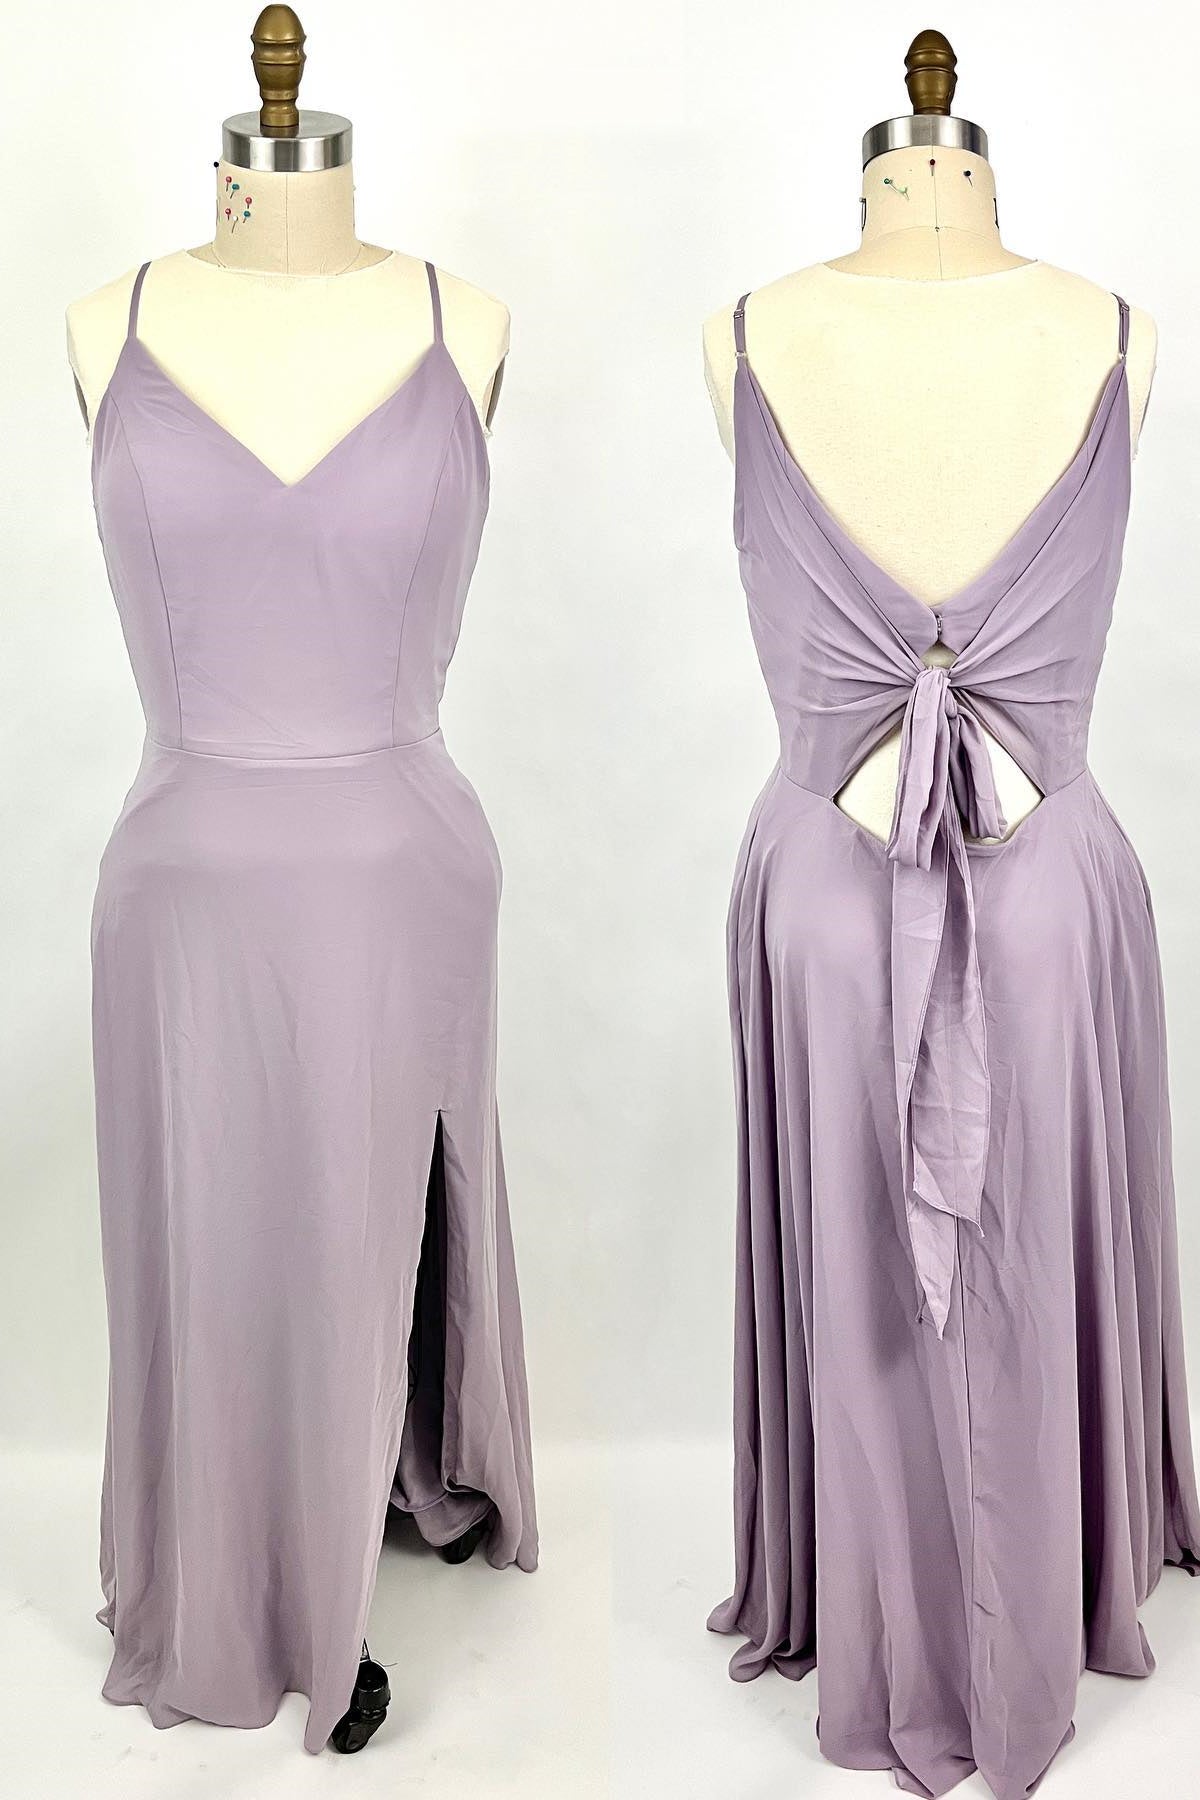 Hoco, Straps Purple A-line Long Bridesmaid Dress with Tie Back